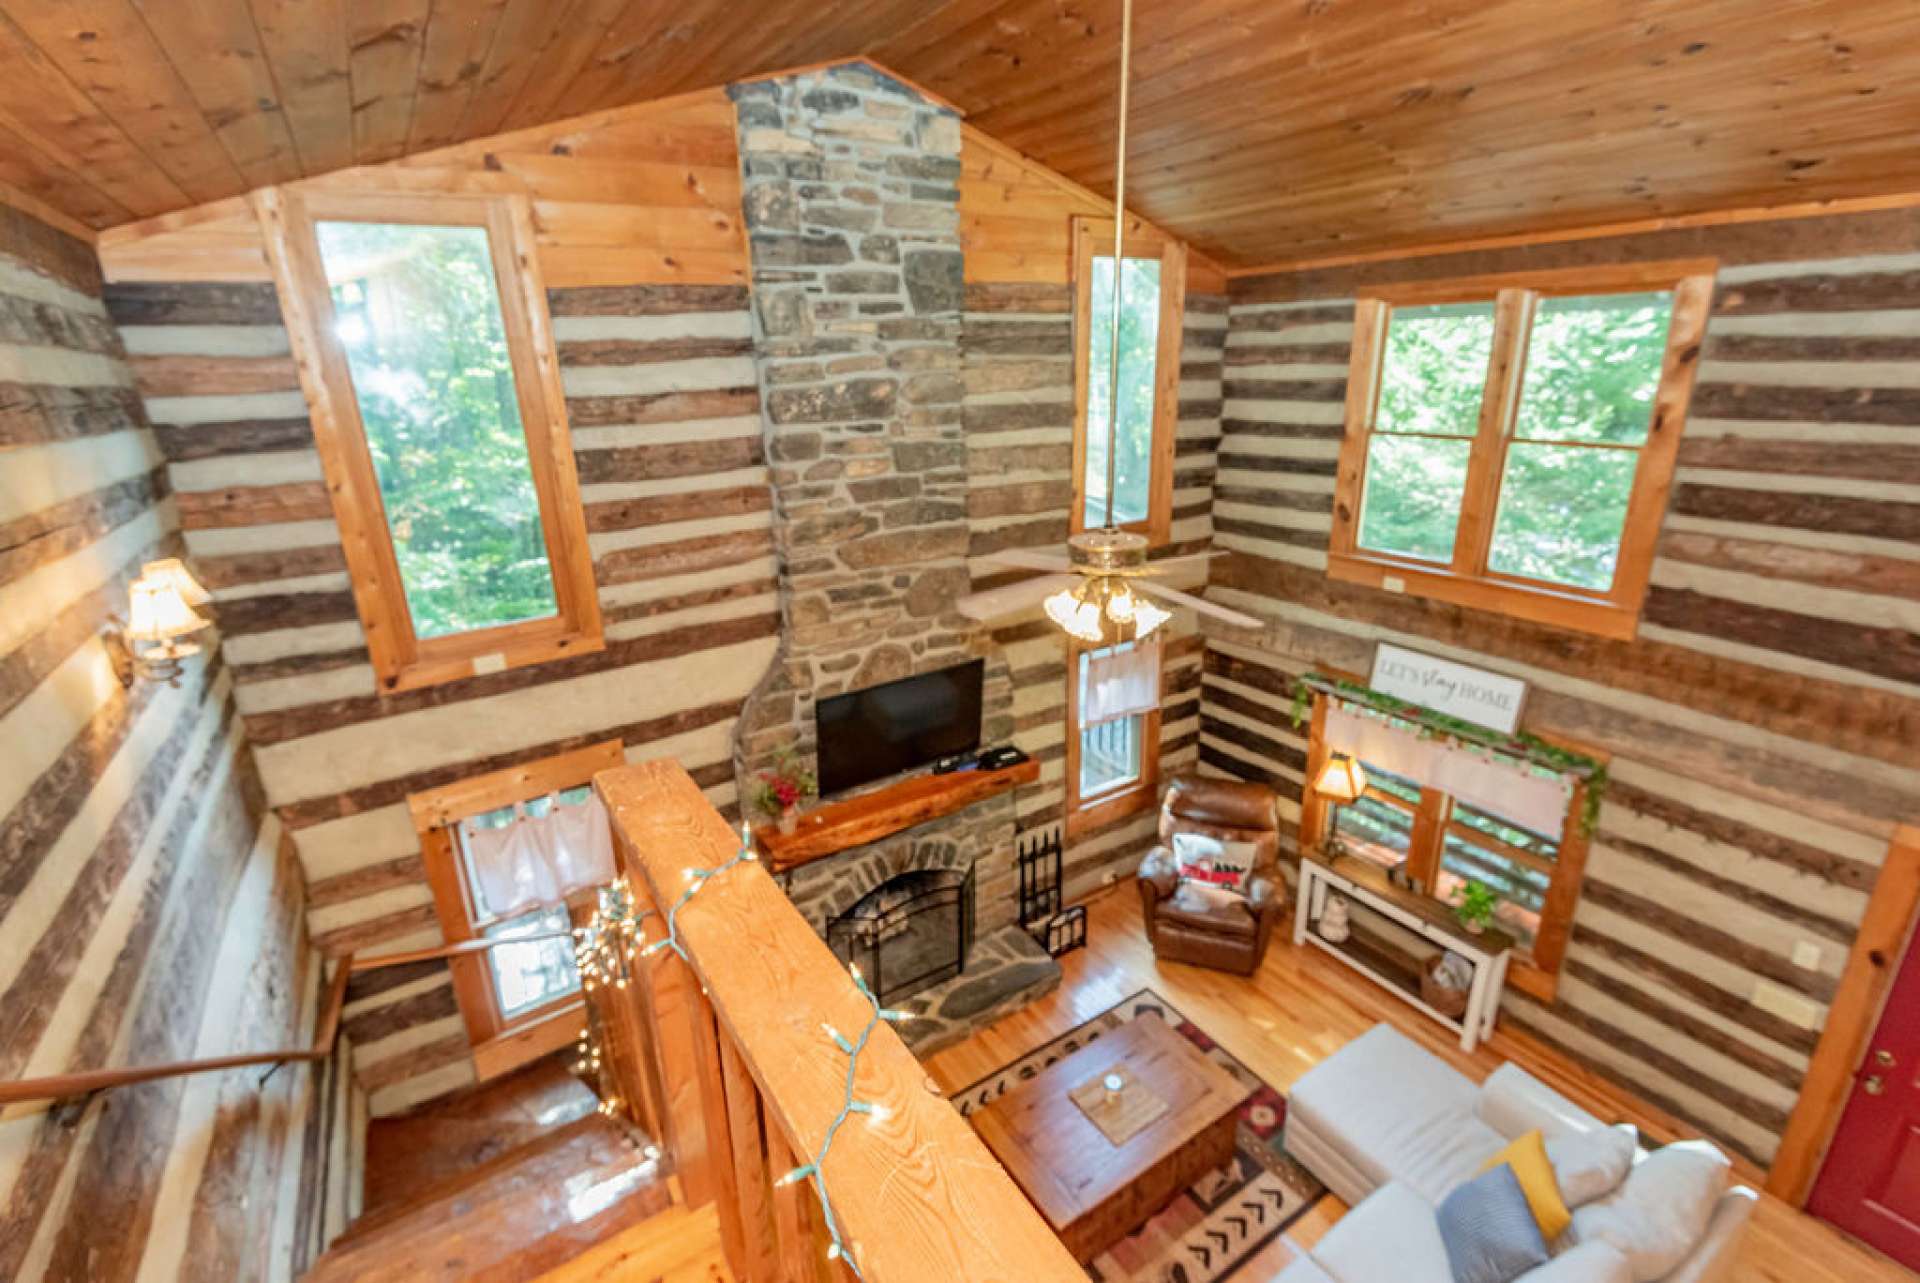 Let the sun shine in! This home is truly unique with all the windows allowing you to enjoy the outdoor scenery throughout all four seasons in the North Carolina Mountains.